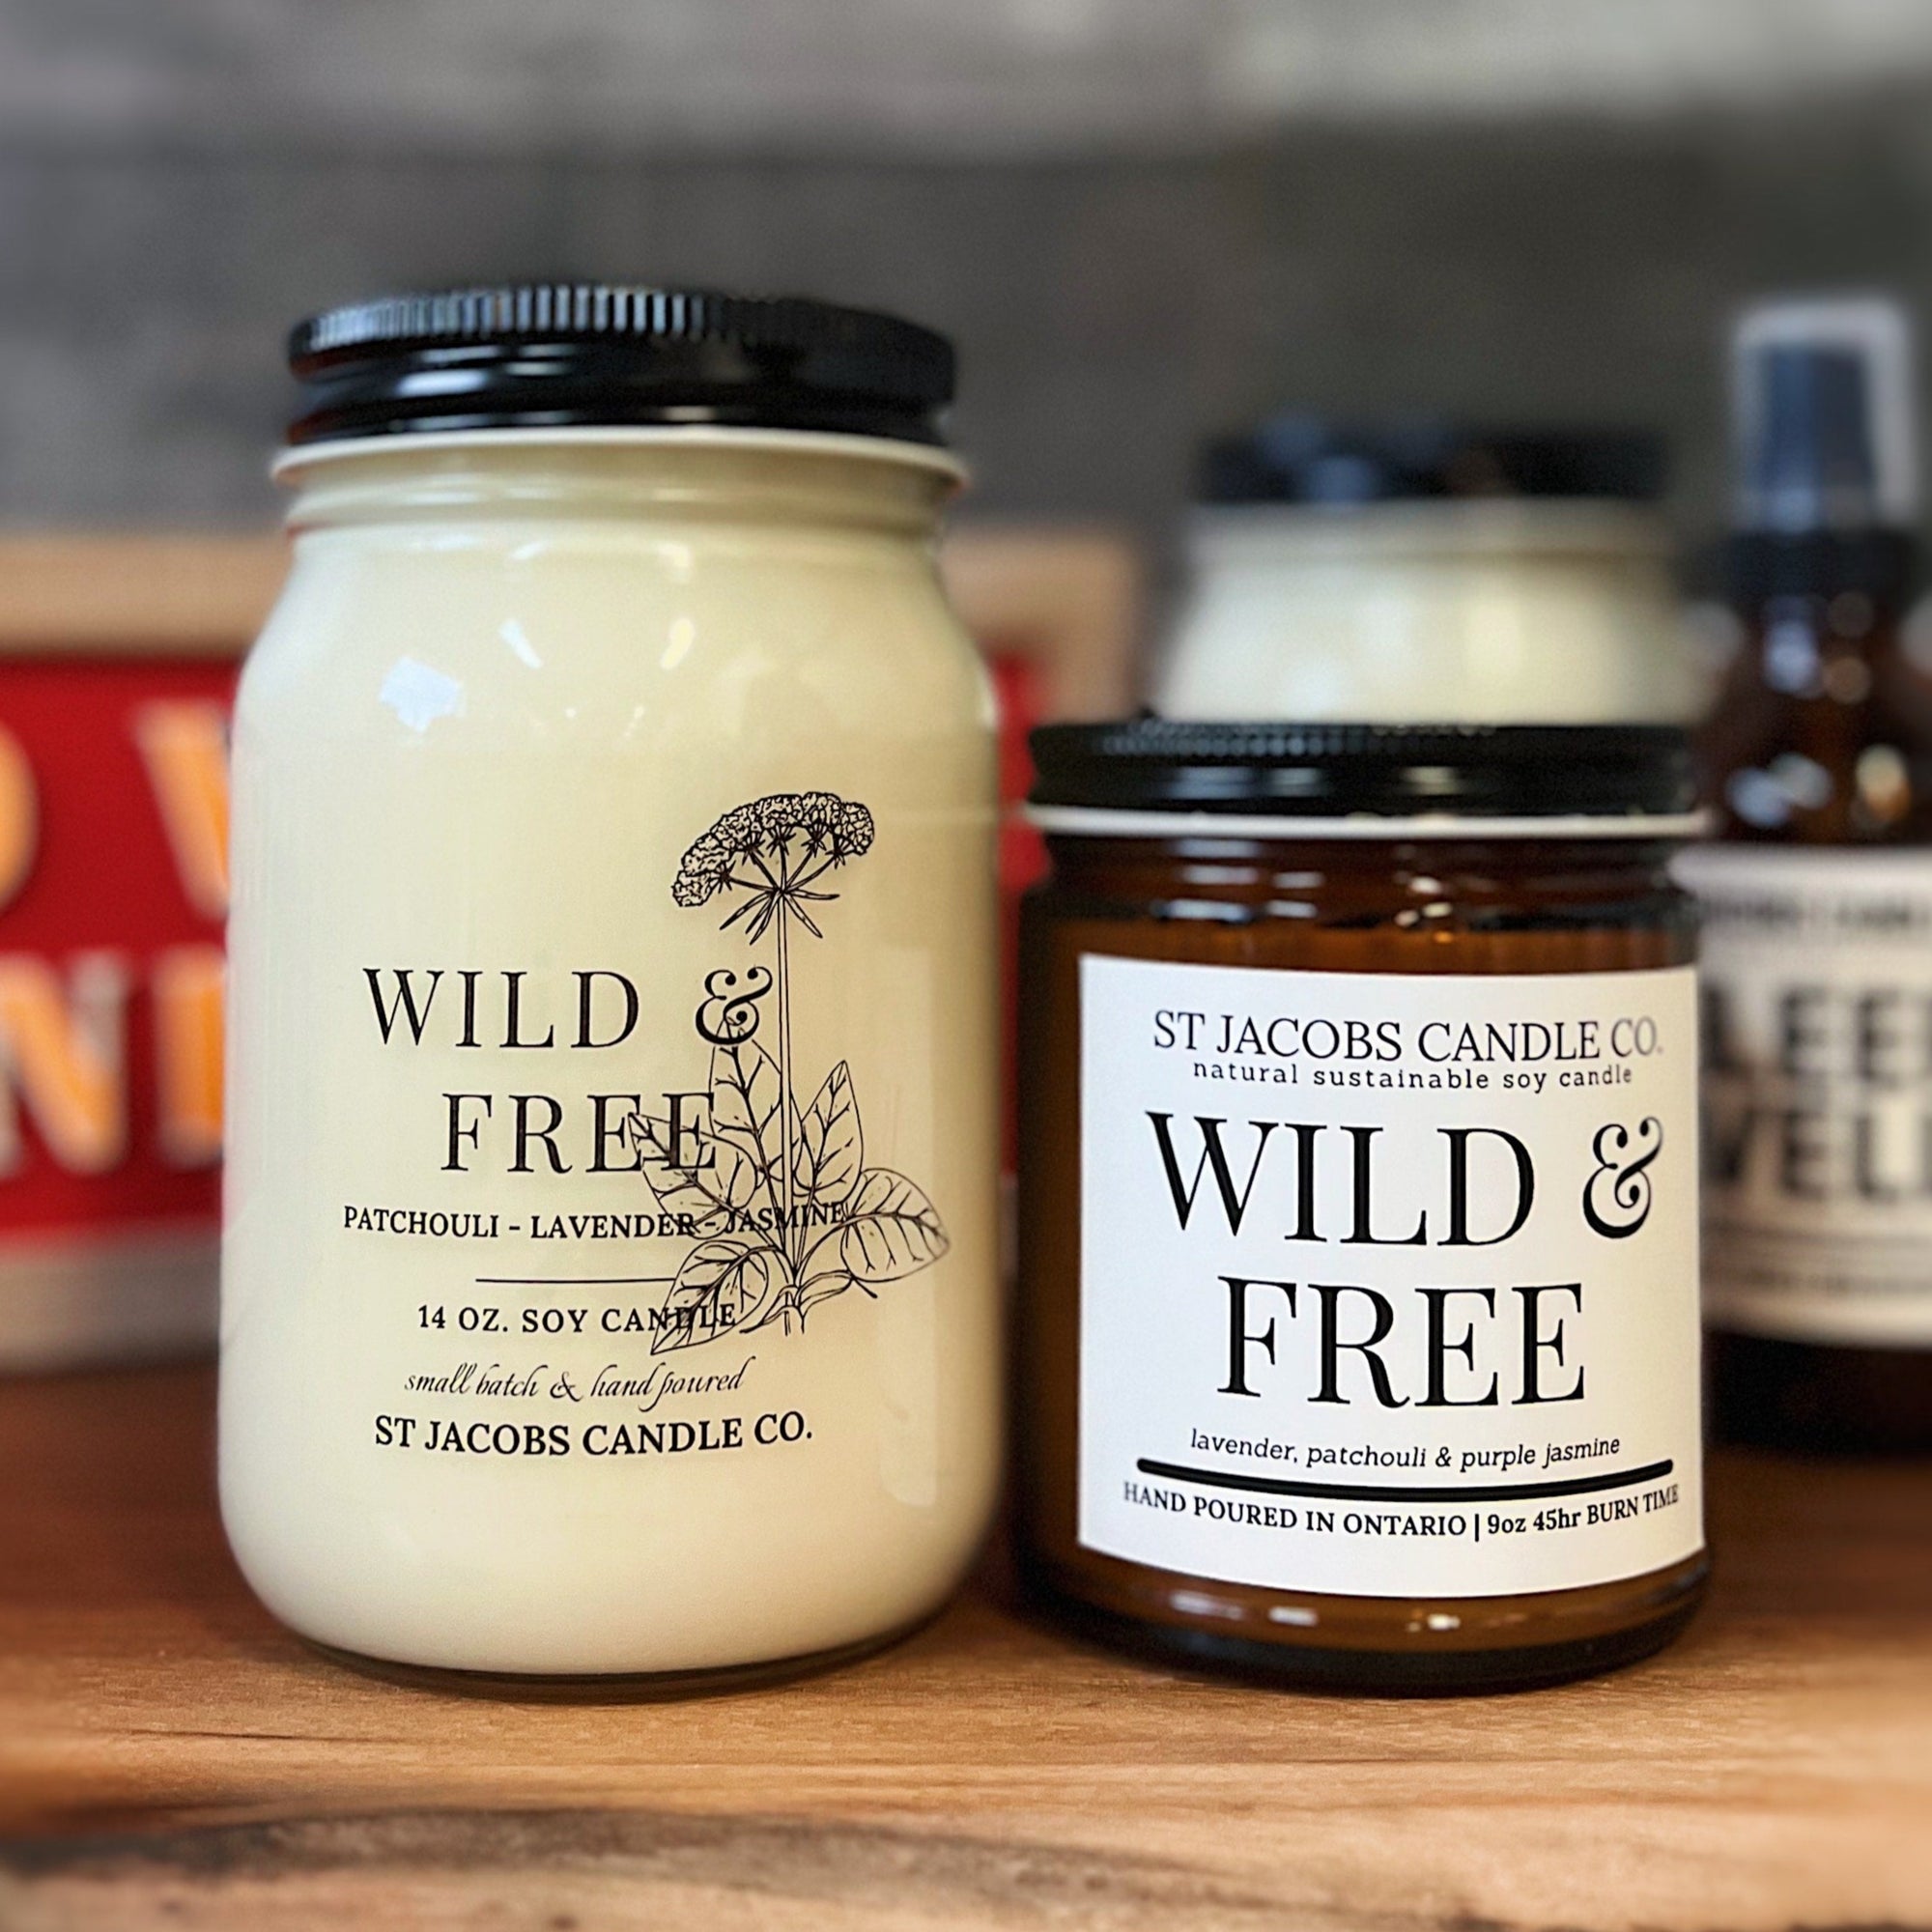 "WILD & FREE" Natural Soy Candle